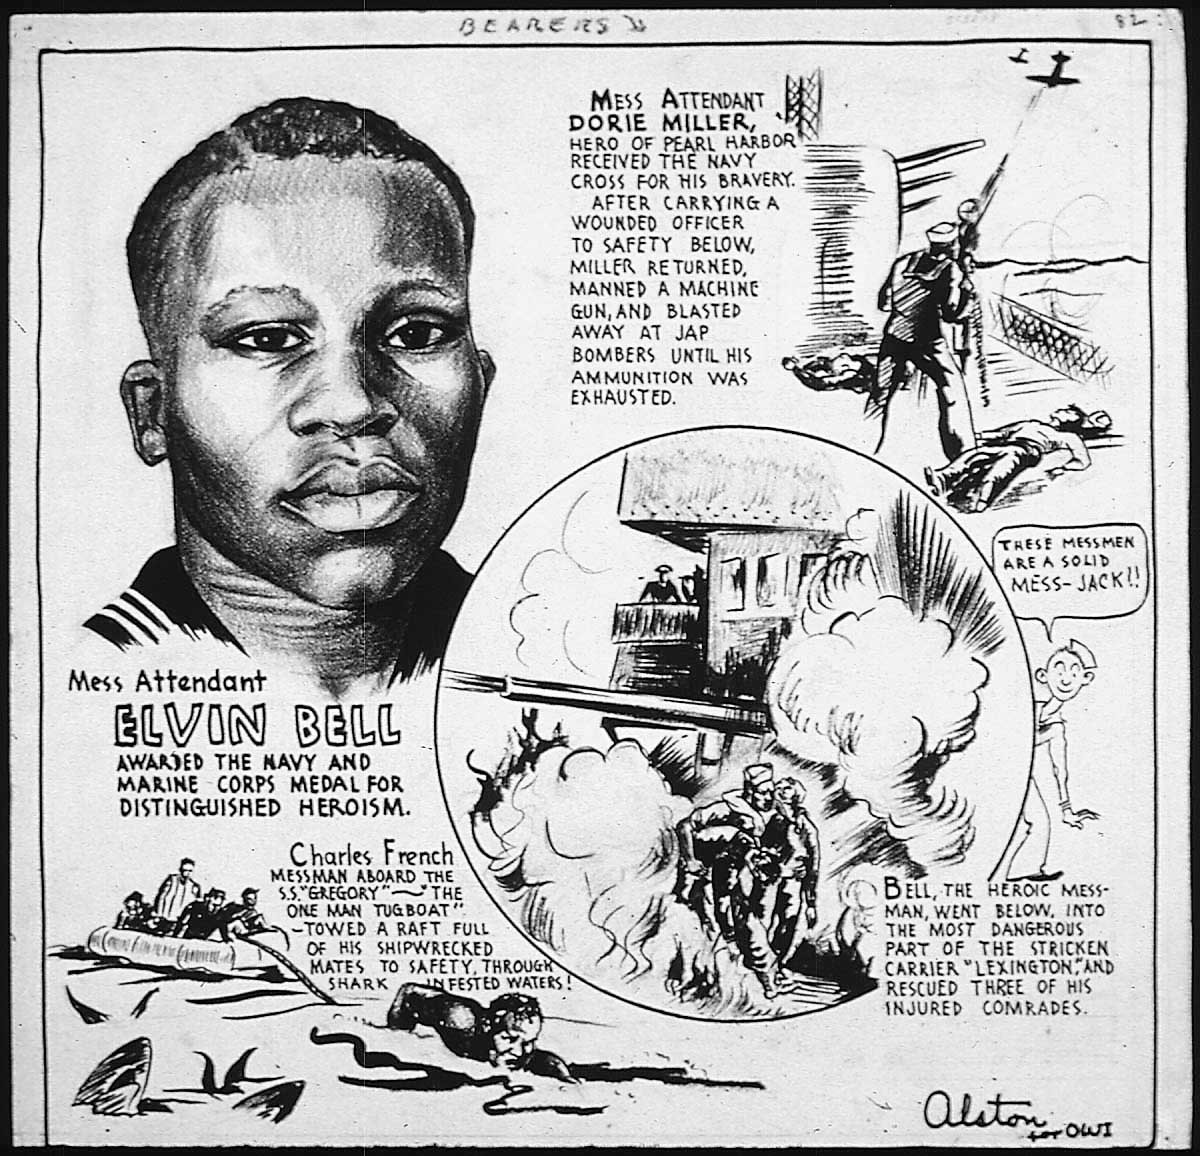 208-COM-226:  Artwork on Doris Miller and Elvin Bell for their heroism, 1941-1942.   Artwork by Charles H. Alston.  Miller received the Navy Cross for his actions at Pearl Harbor during the Japanese Attack on December 7, 1941.   During the Battle of the Coral Sea, Machinist’s Mate Apprentice Third Class Elvin Bell, USN, received the Navy and Marine Corps Medal for his heroism for saving three other Sailors during an explosion onboard USS Lexington (CV-2) after being hit by Japanese bombs during the Battle of the Coral Sea on May 8, 1942.   Also included is Messman Charles French who saved a raft full of shipmates through shark-infested waters.  Official War of Information photograph, now in the collections of the National Archives.  